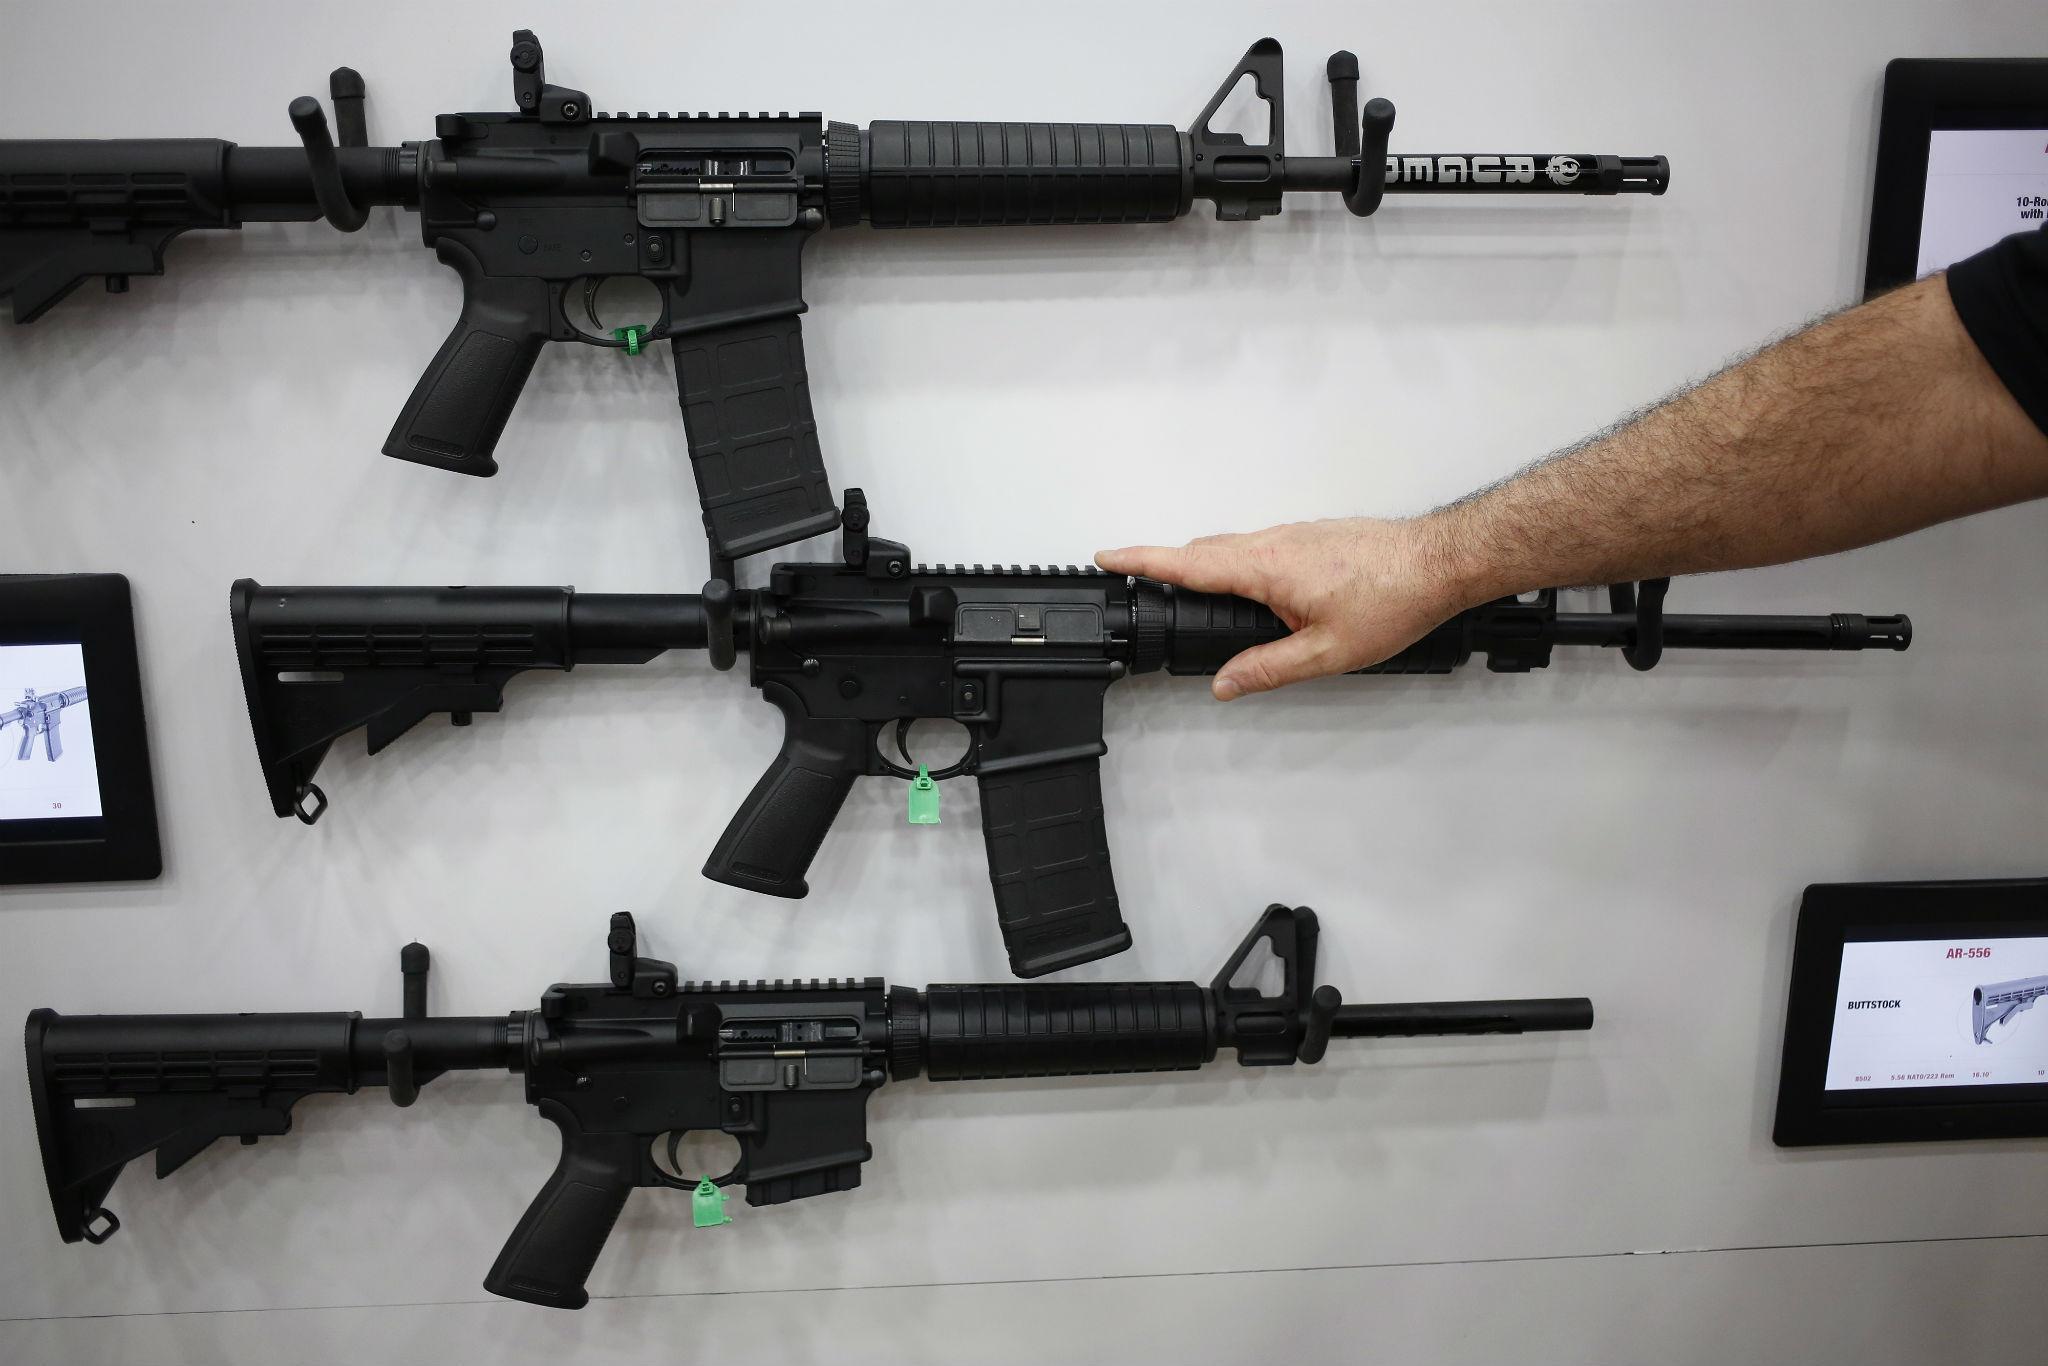 AR-15 style assault rifles, like these, were used by the gunmen in Sandy Hook, Orlando and many other mass shooting incidents